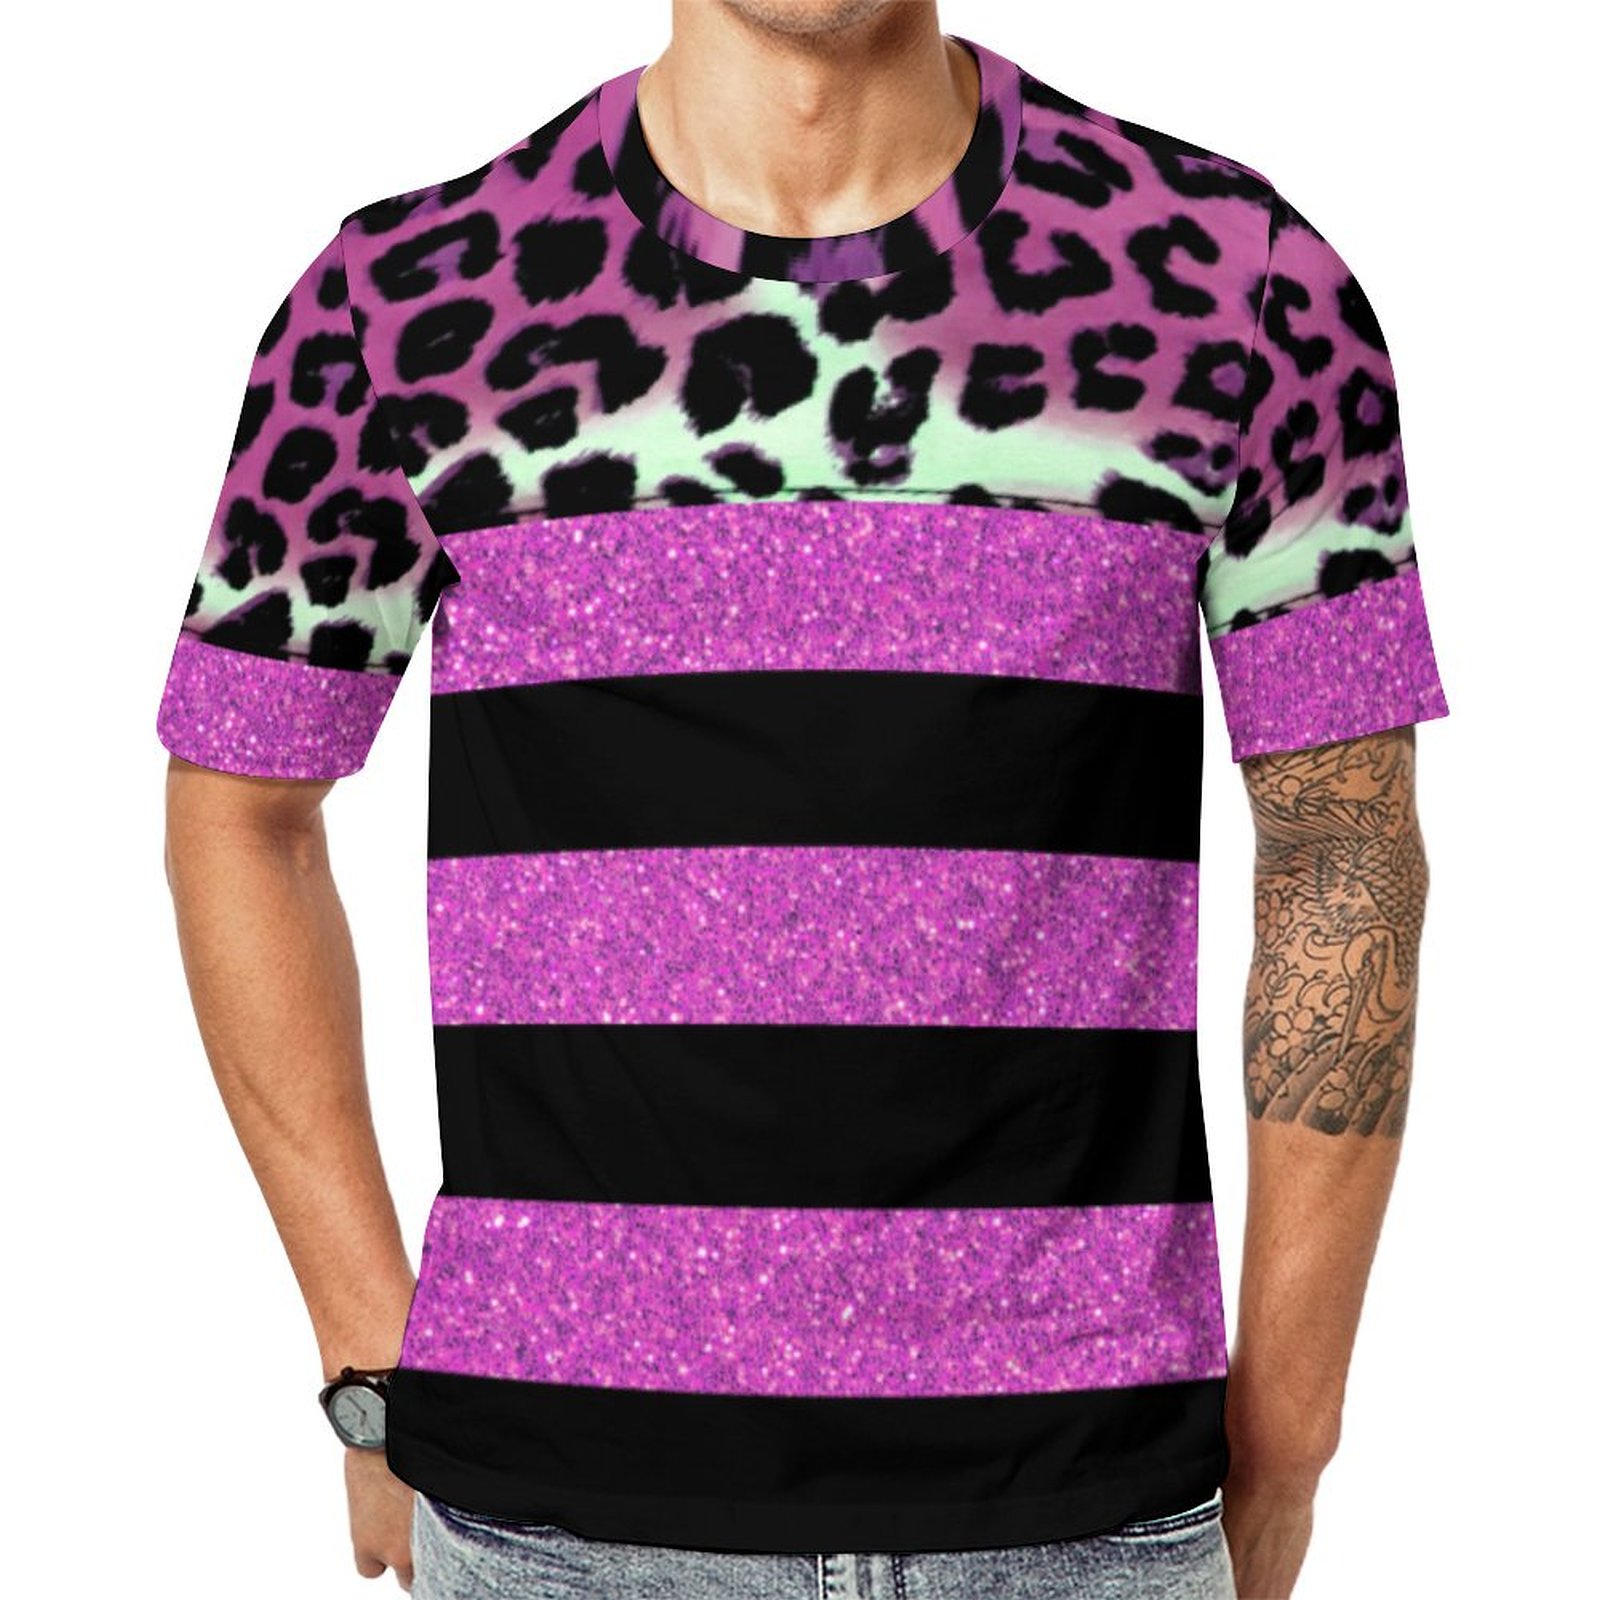 Chic Pink Leopard Black Pink Glitter Stripes Short Sleeve Print Unisex Tshirt Summer Casual Tees for Men and Women Coolcoshirts